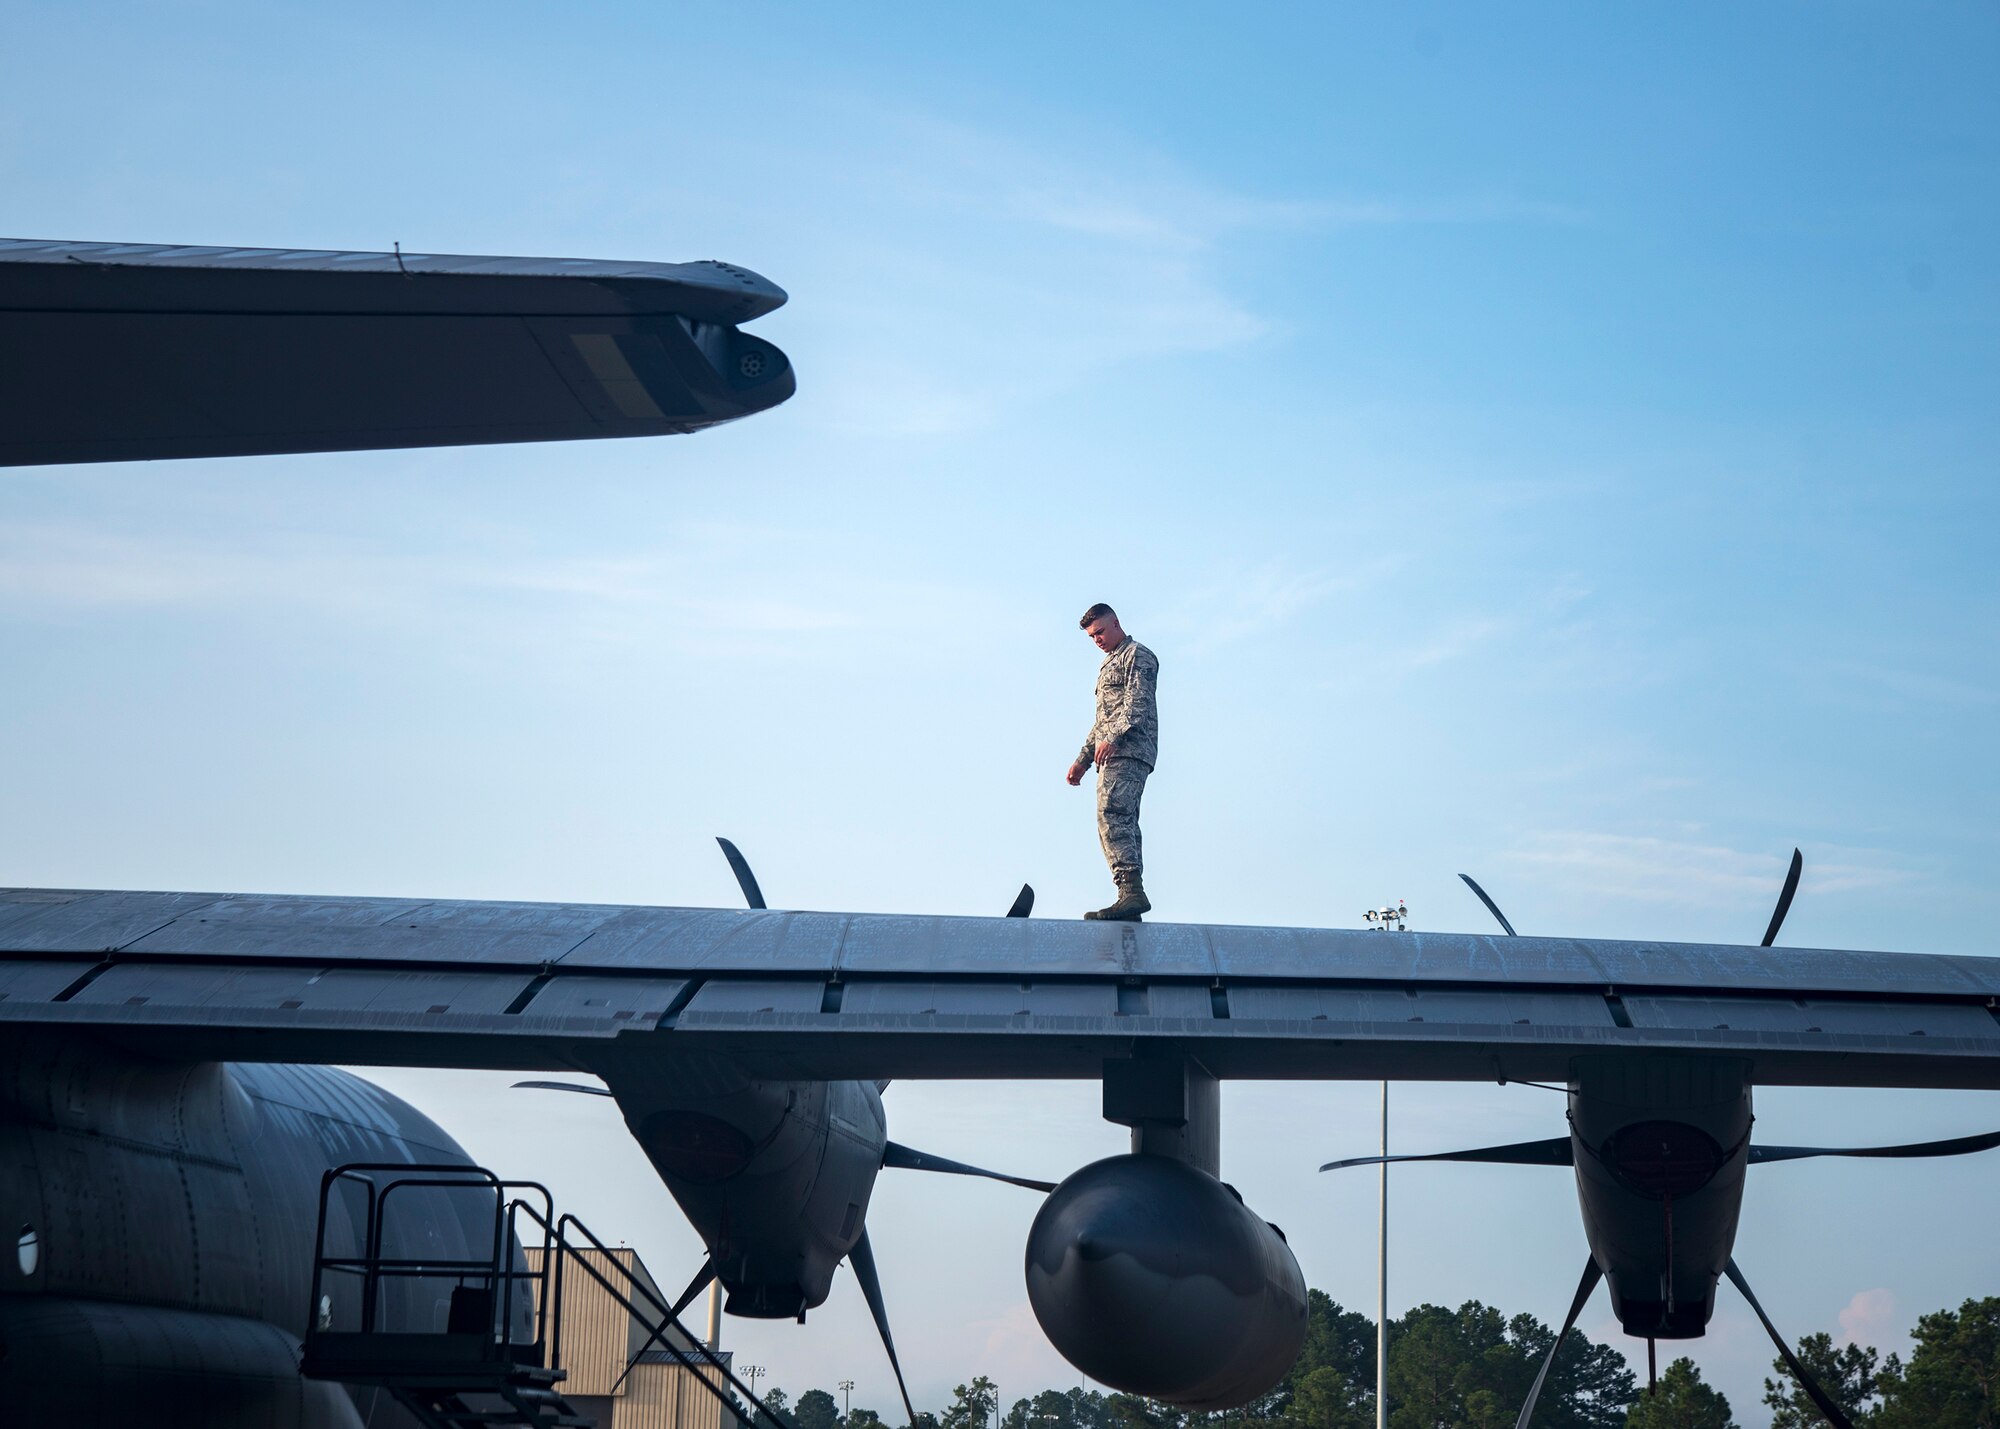 An Airman from the 71st Aircraft Maintenance Unit (AMU) inspects the tail rotor of an HC-130J Combat King II, Aug. 13, 2019, at Moody Air Force Base, Ga. Airmen from the 71st AMU perform various tasks prior to takeoff to ensure the aircraft is performing optimally to complete its mission of supporting the 71st Rescue Squadron. Those tasks consist of: pre-flight inspection, removing plugs and cover, repairing any problems found during crew pre-flight checks as well as marshaling the aircraft for takeoff. (U.S. Air Force photo by Airman 1st Class Eugene Oliver)